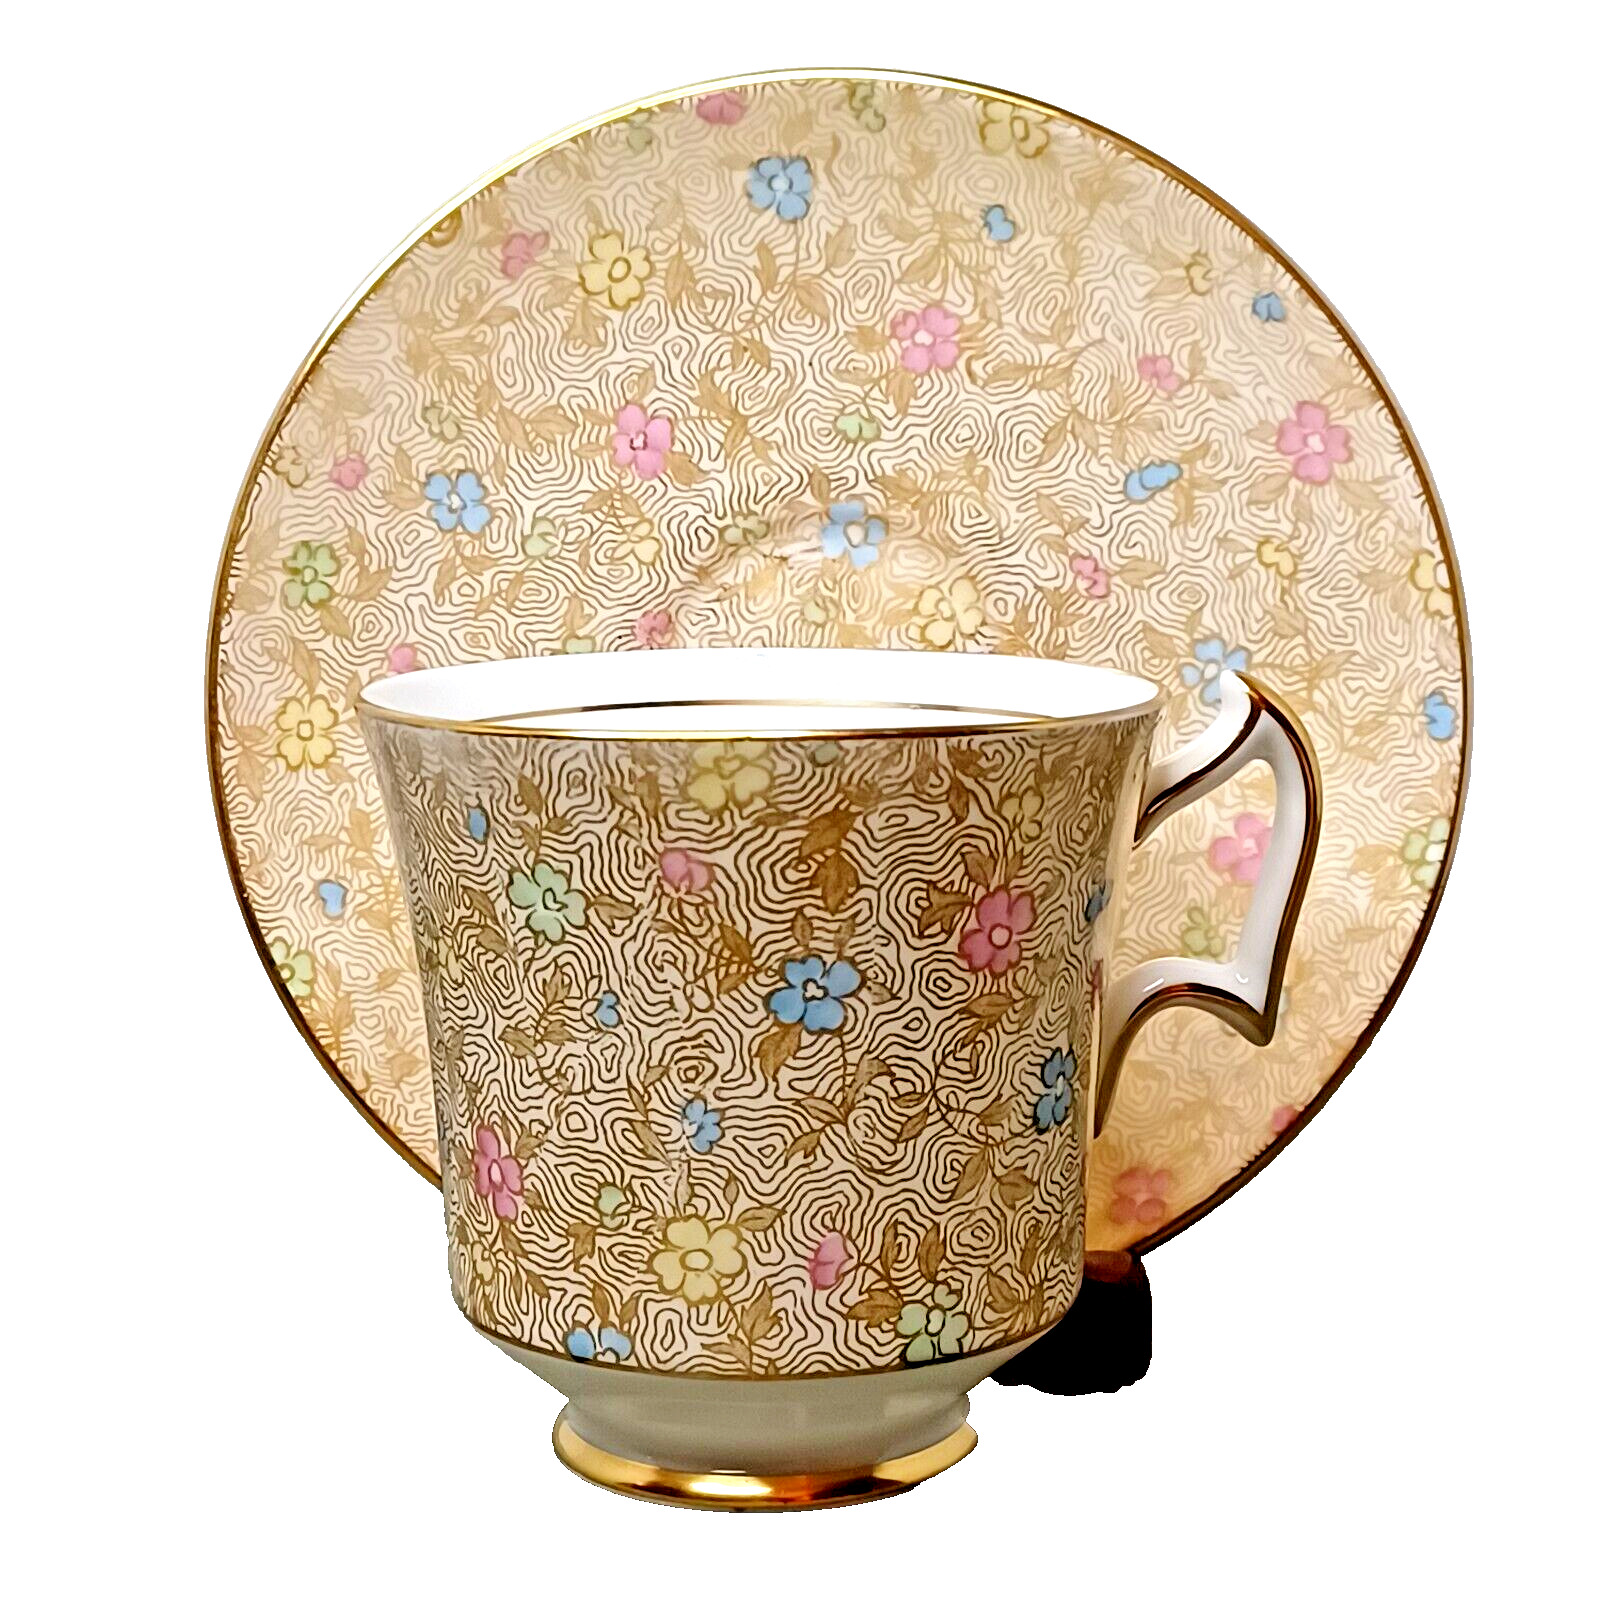 Vintage Tea Cup and Saucer Royal Chelsea Dainty Flowers Intricate Gold Trim